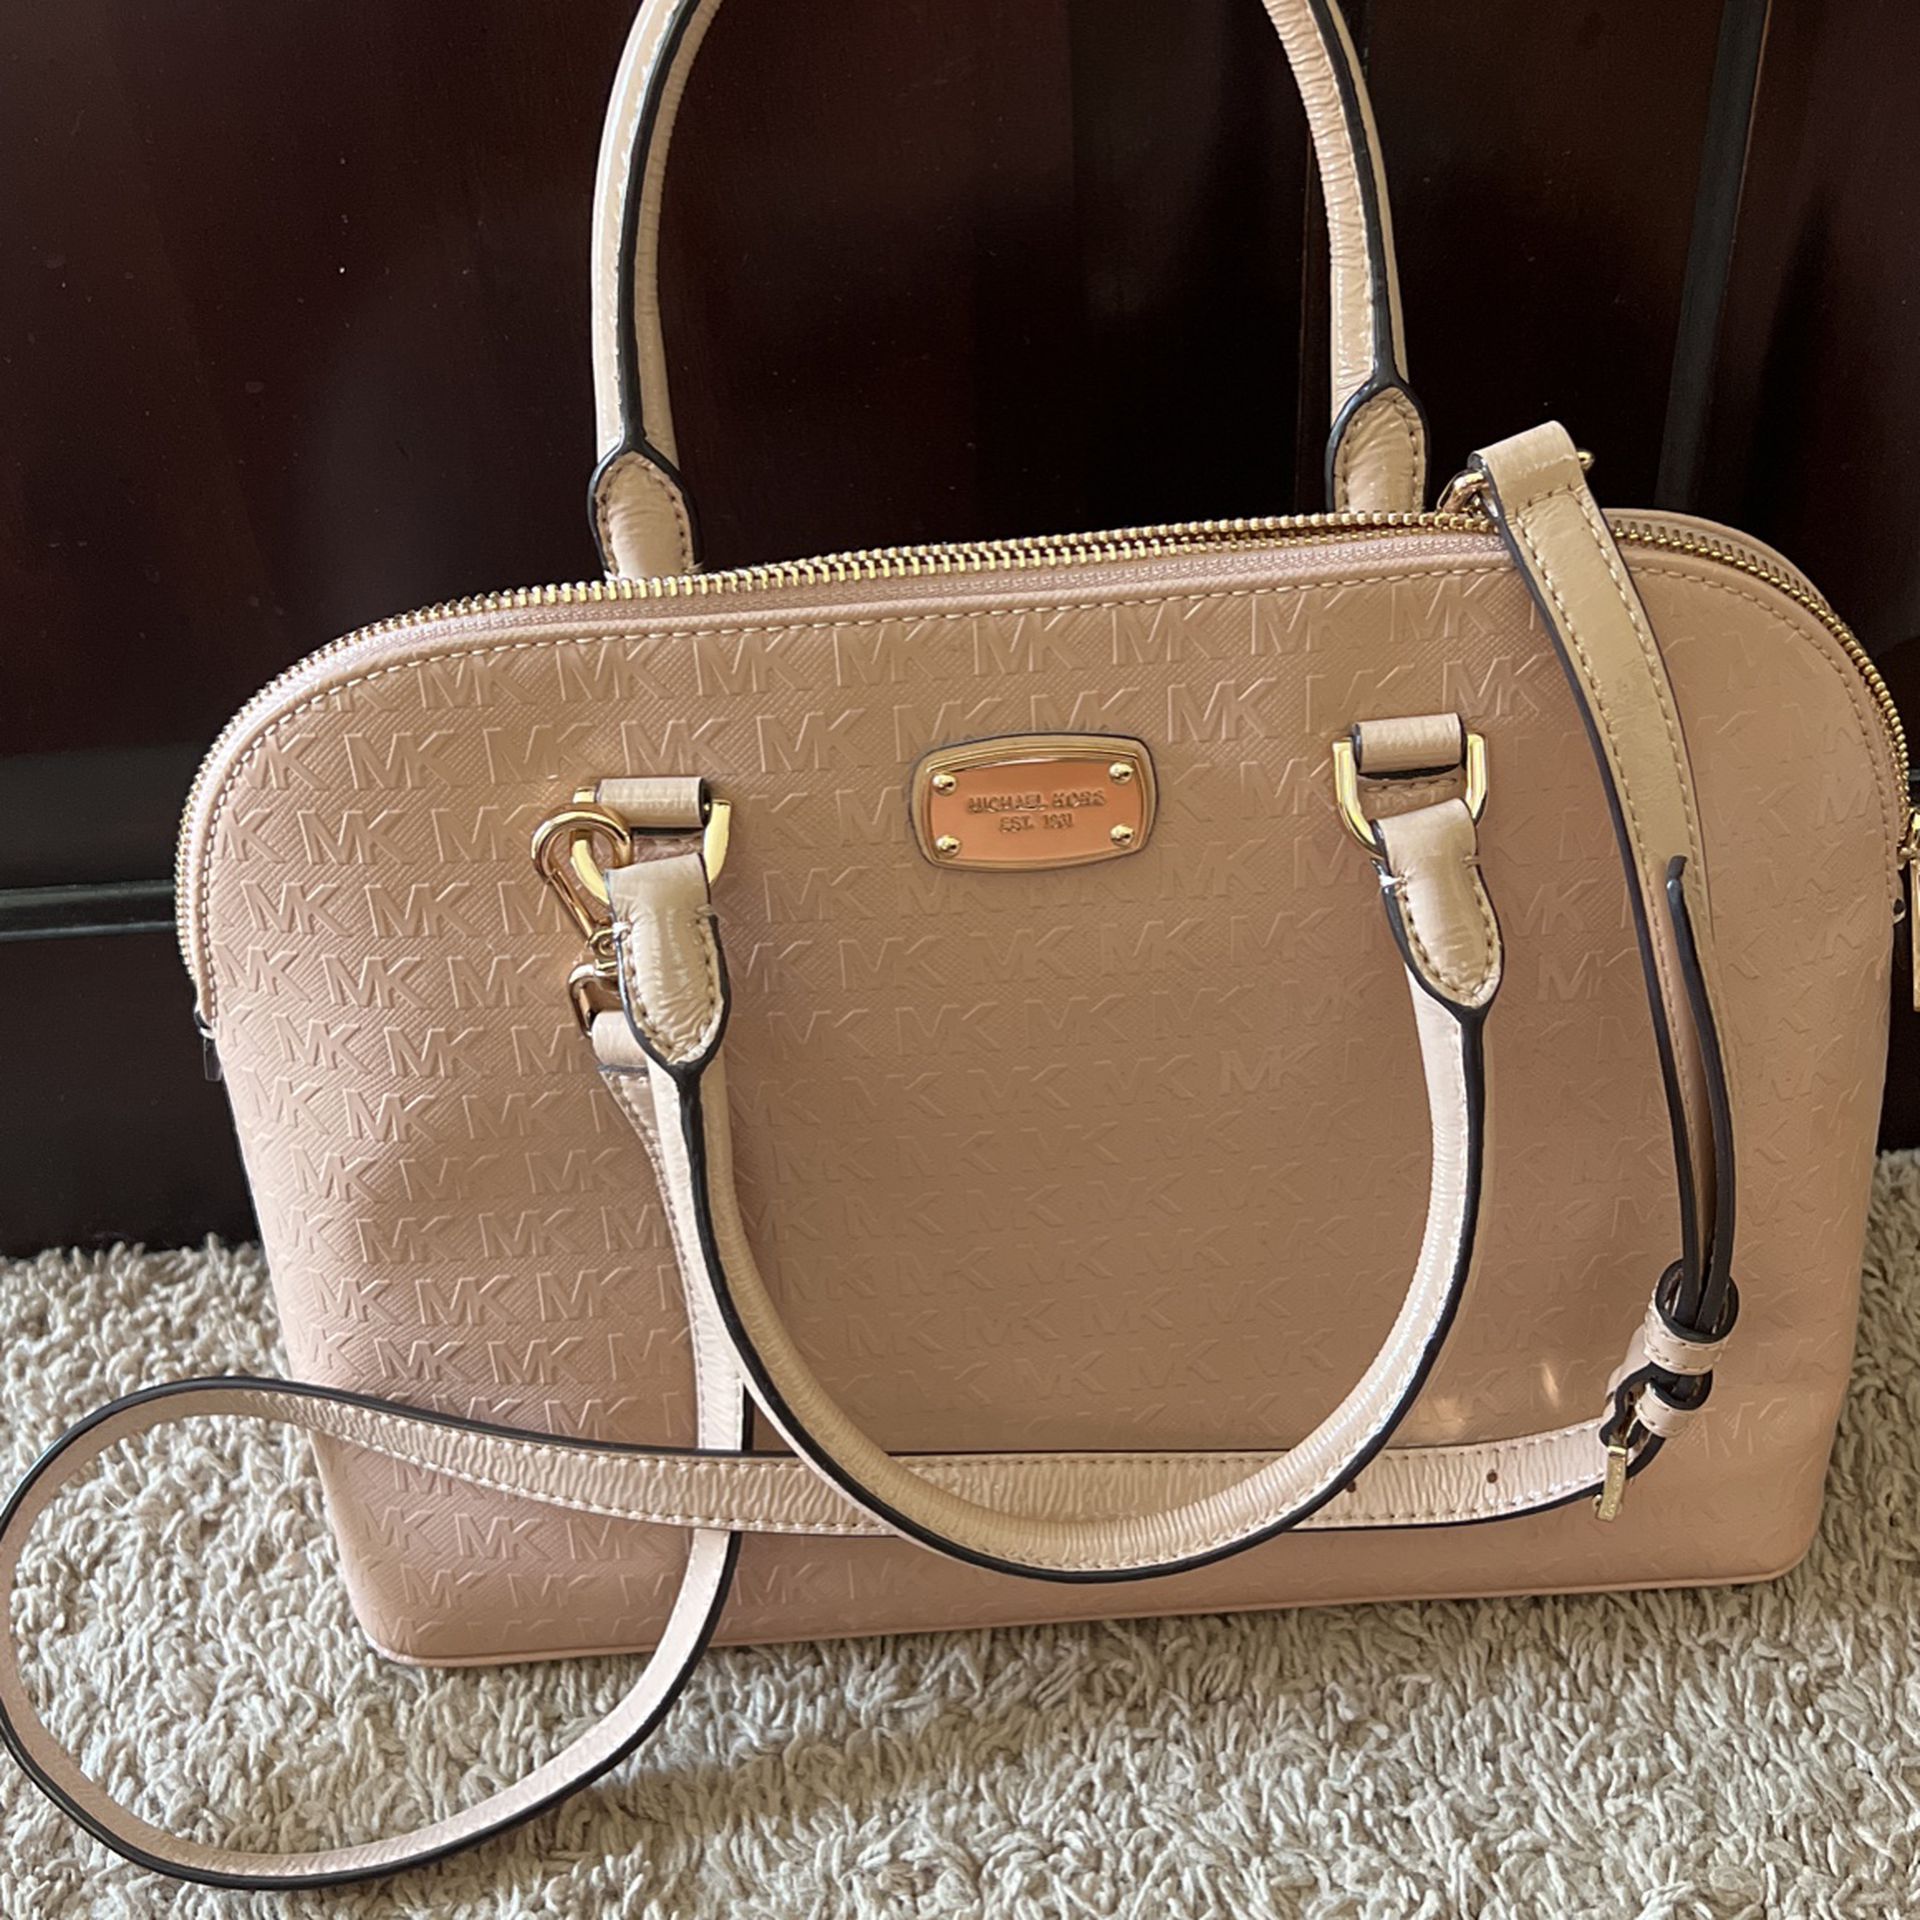 Cindy Large Leather Dome Satchel